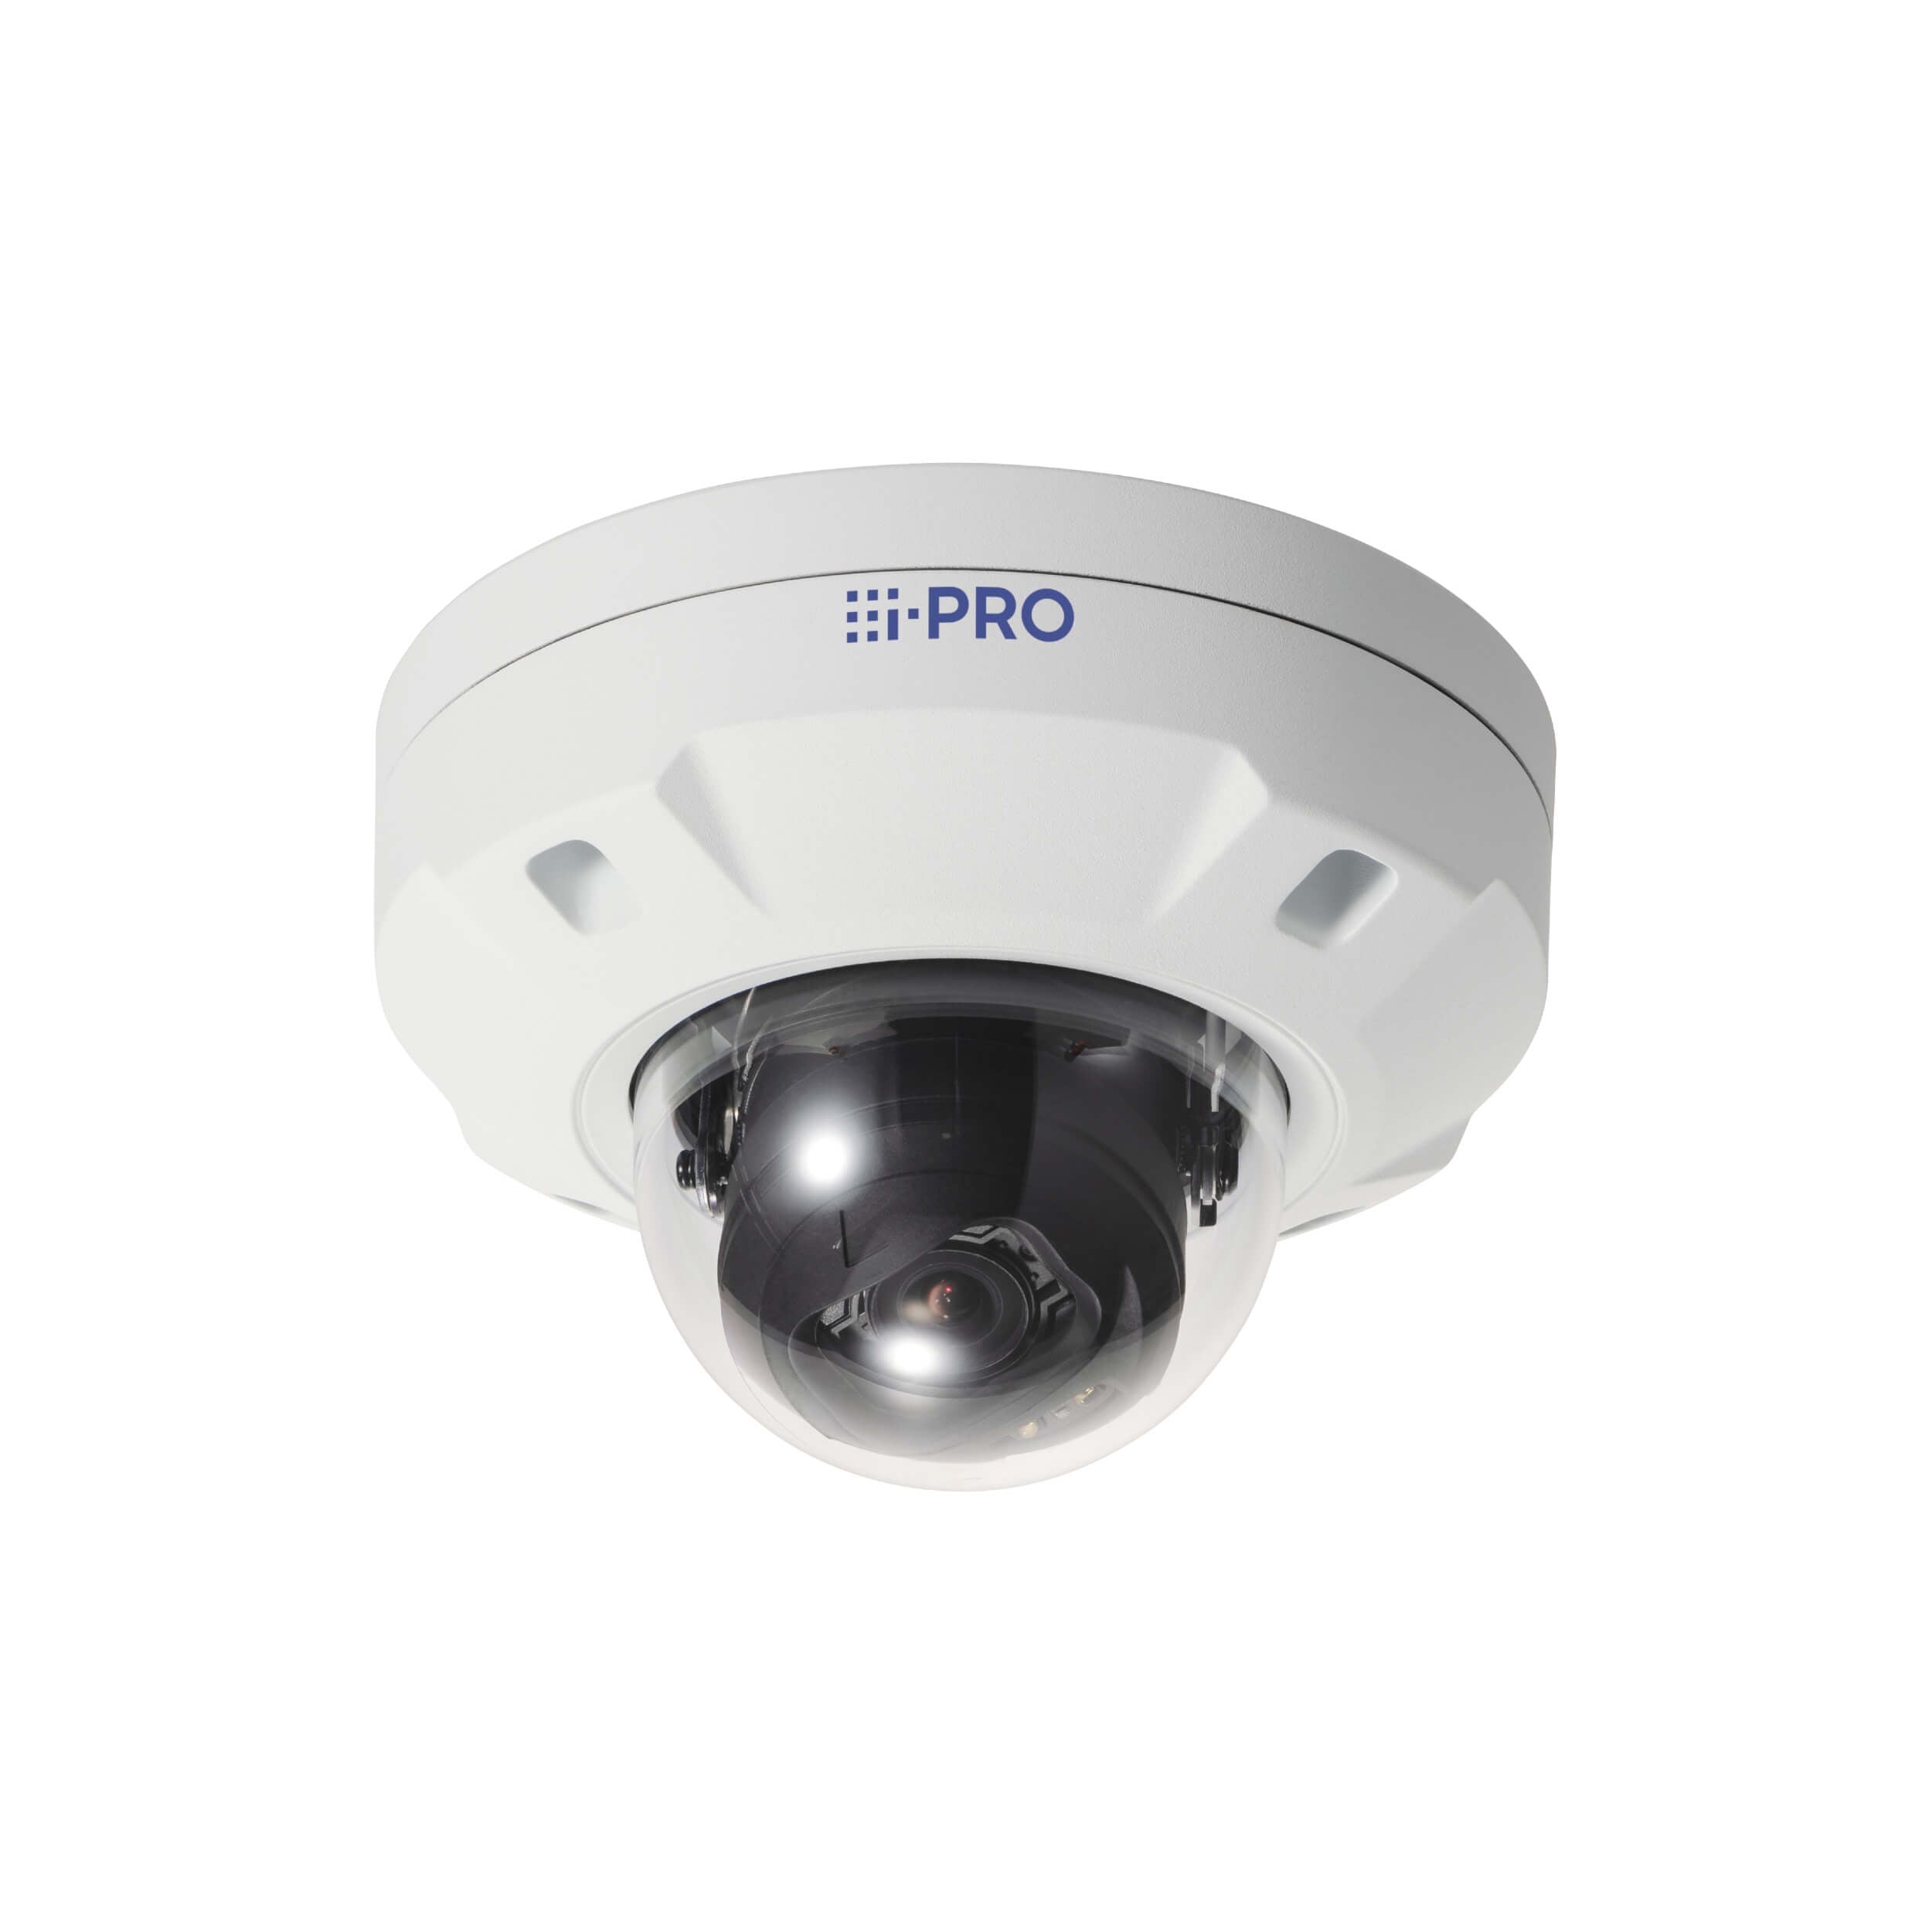 Panasonic WV-S25500-F6L 5MP Vandal Resistant Outdoor Dome Network Camera with AI Engine with 6.1mm Lens